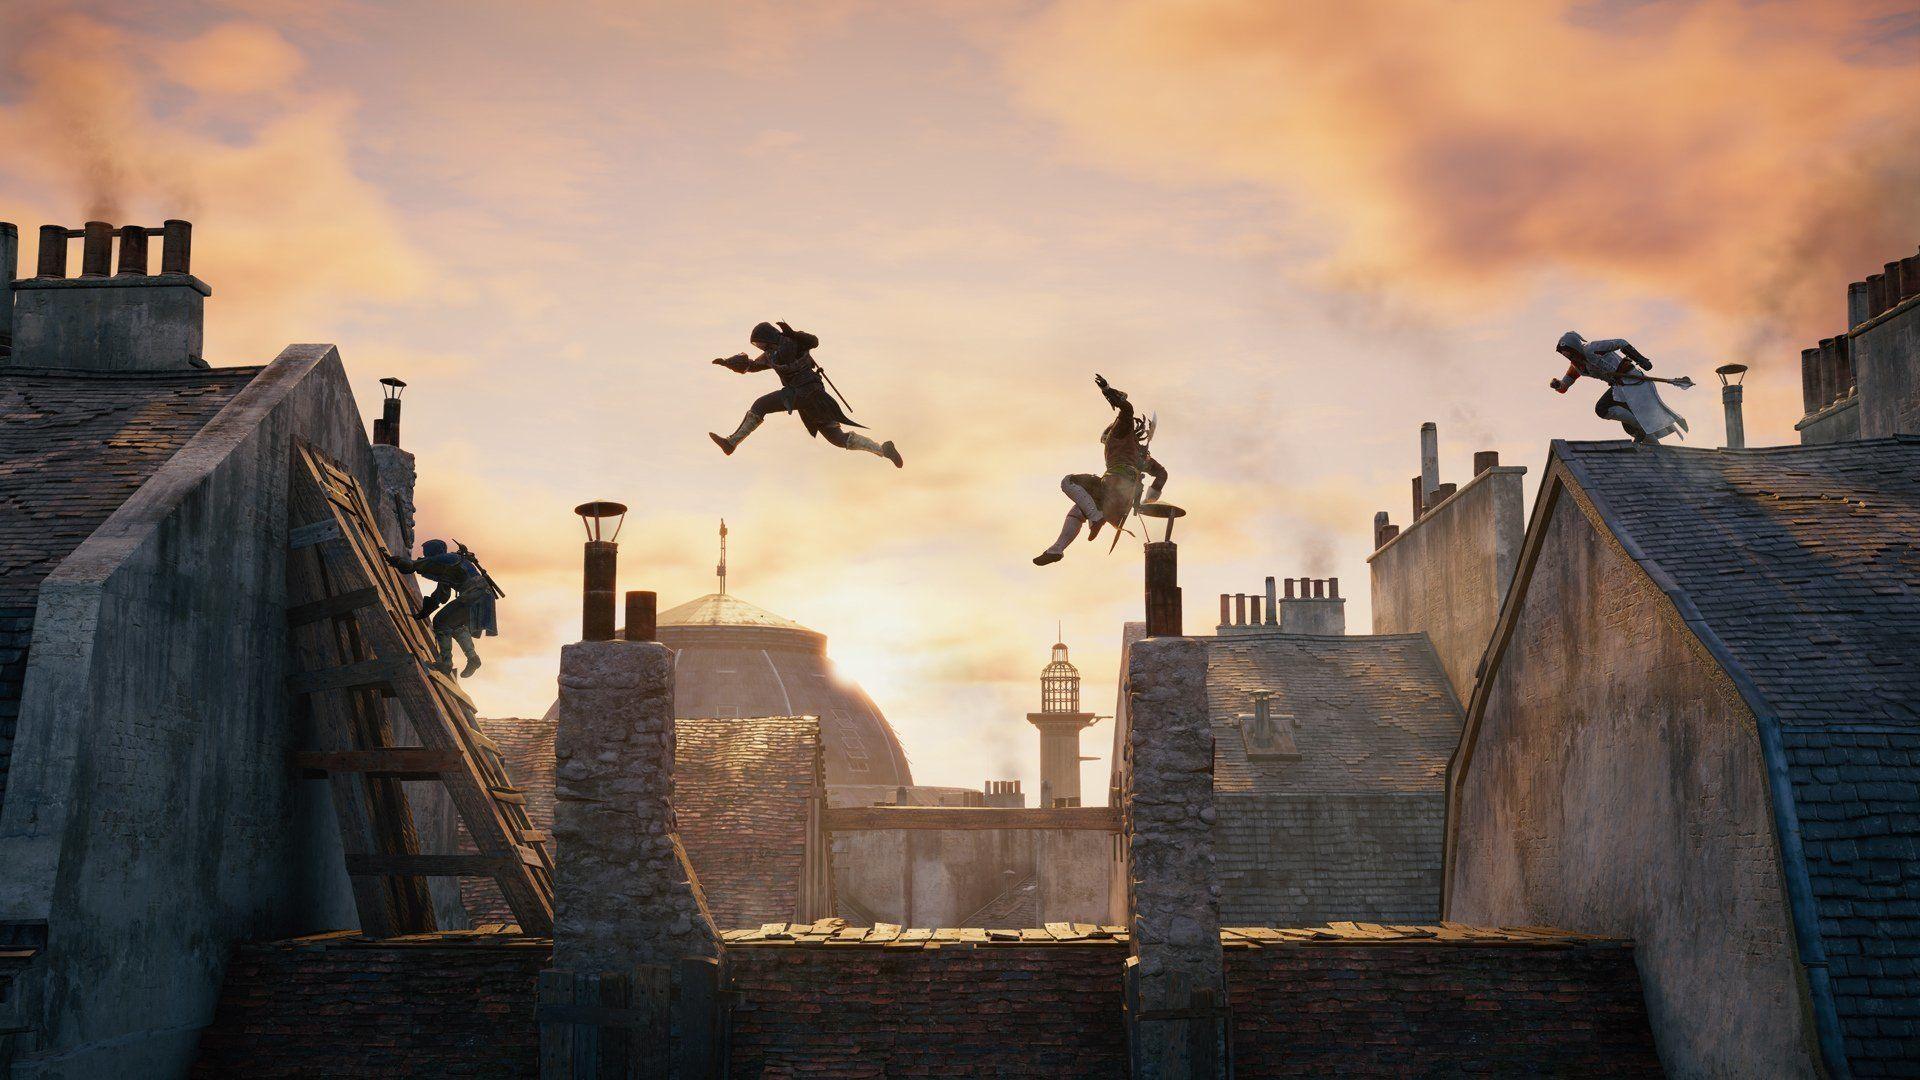 Assassin's Creed: Unity HD Wallpaper. Background